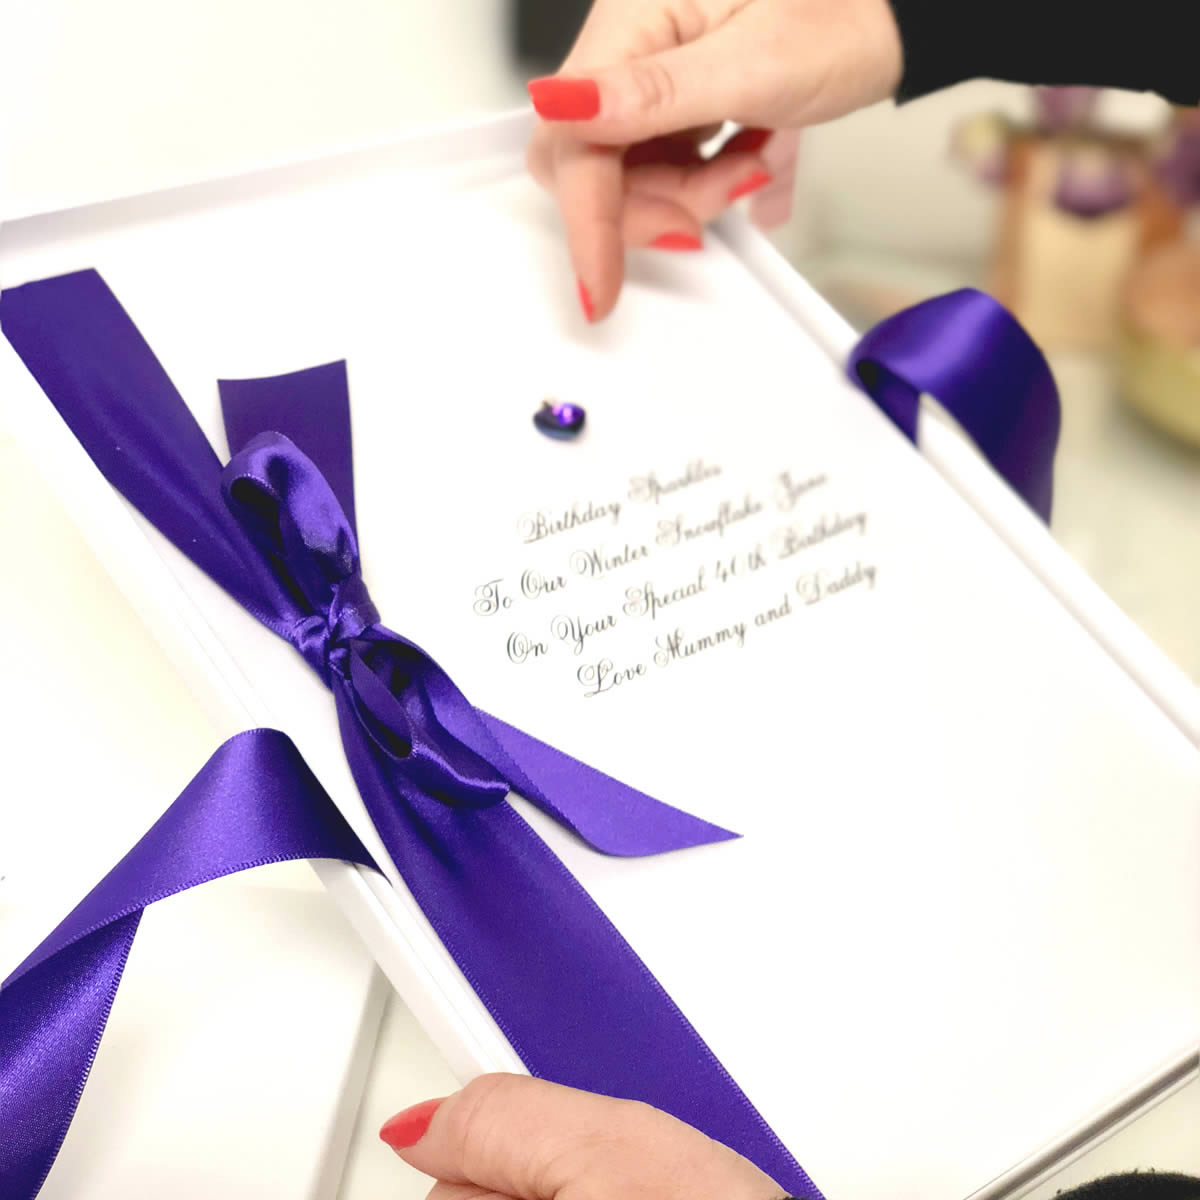 Brilliant amethyst birthstone meaning cards for February birthday | The Luxe Co